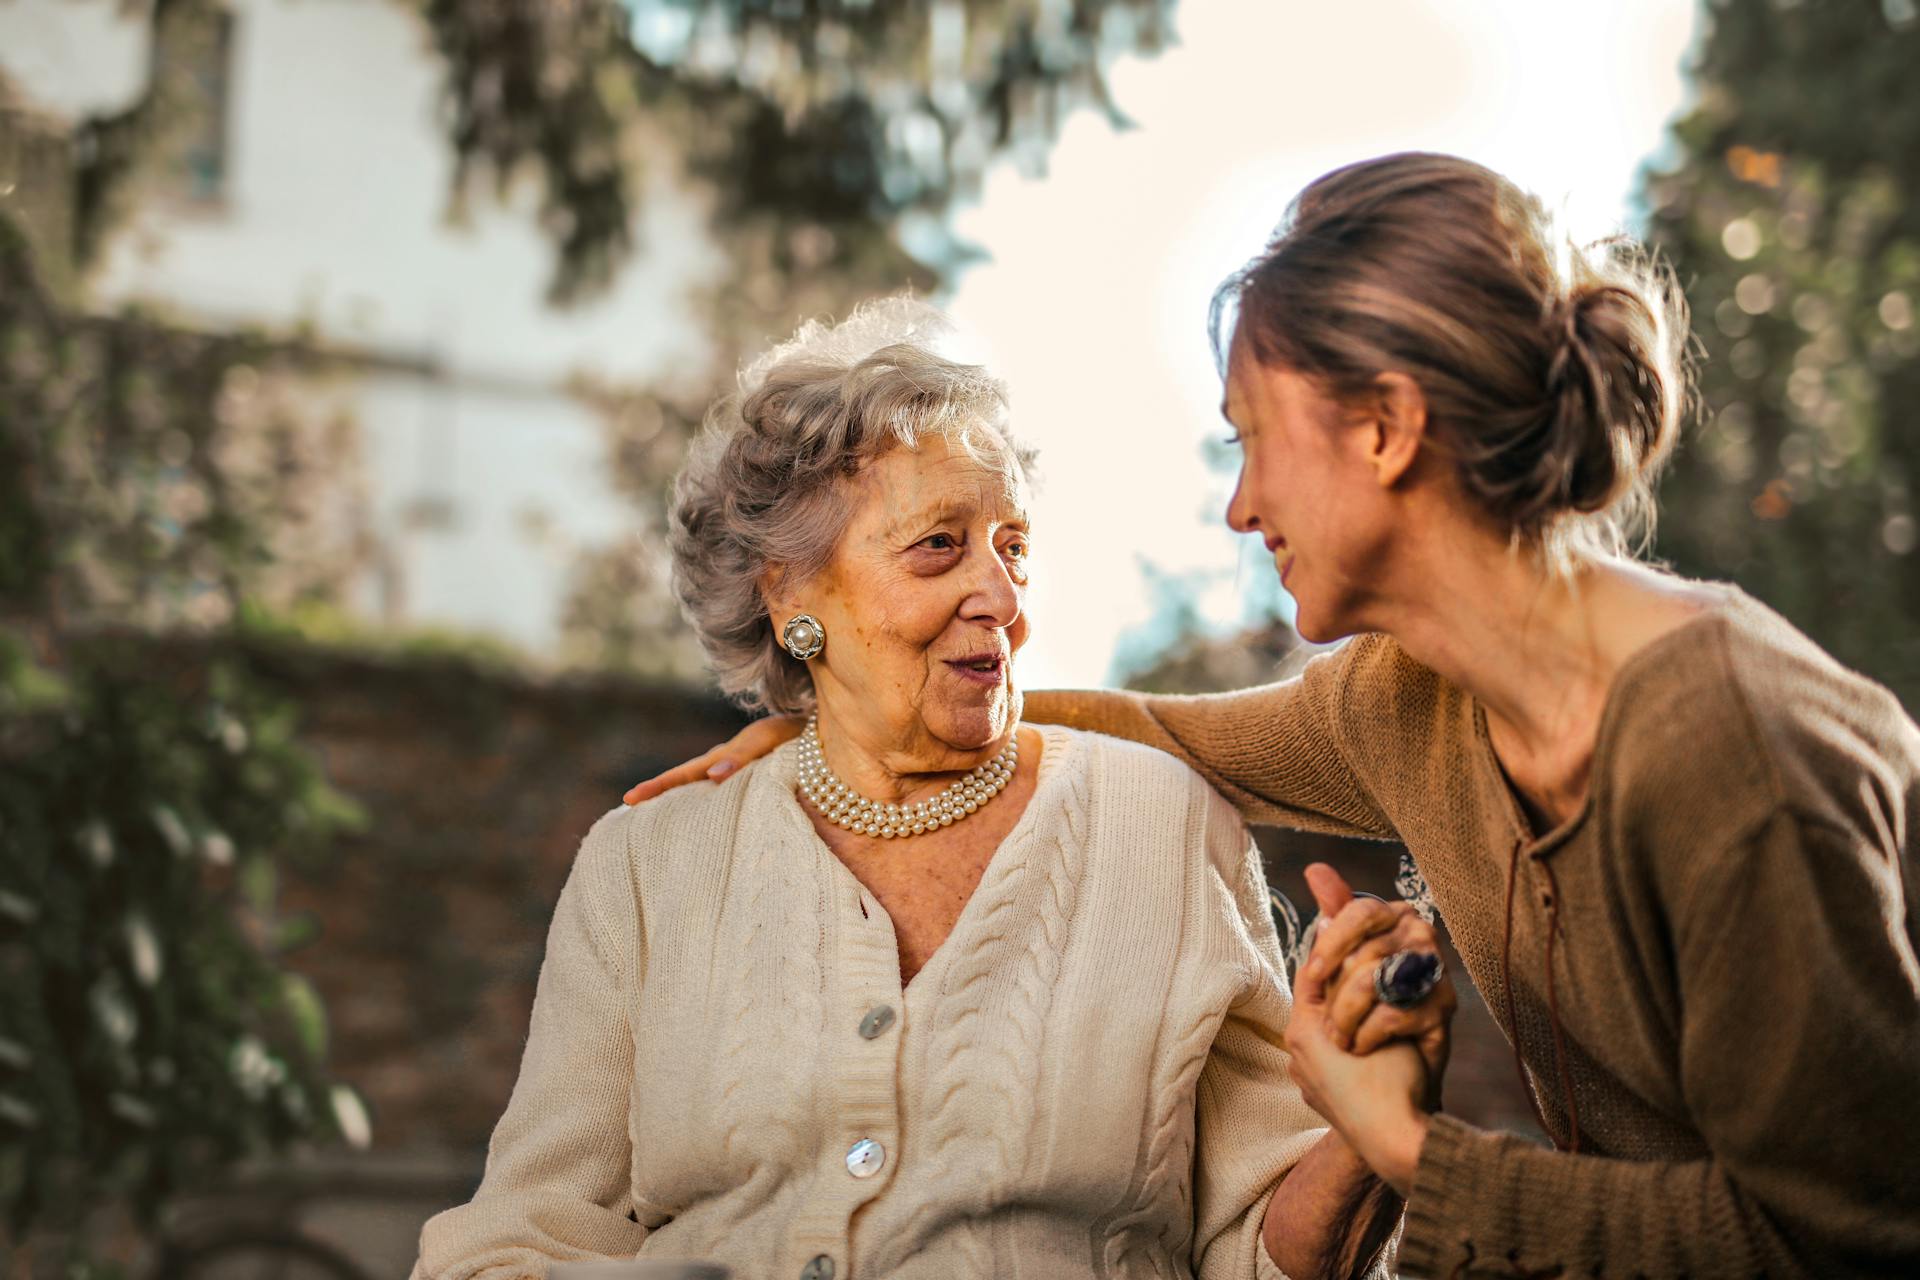 An elderly woman speaking to a younger woman | Source: Pexels